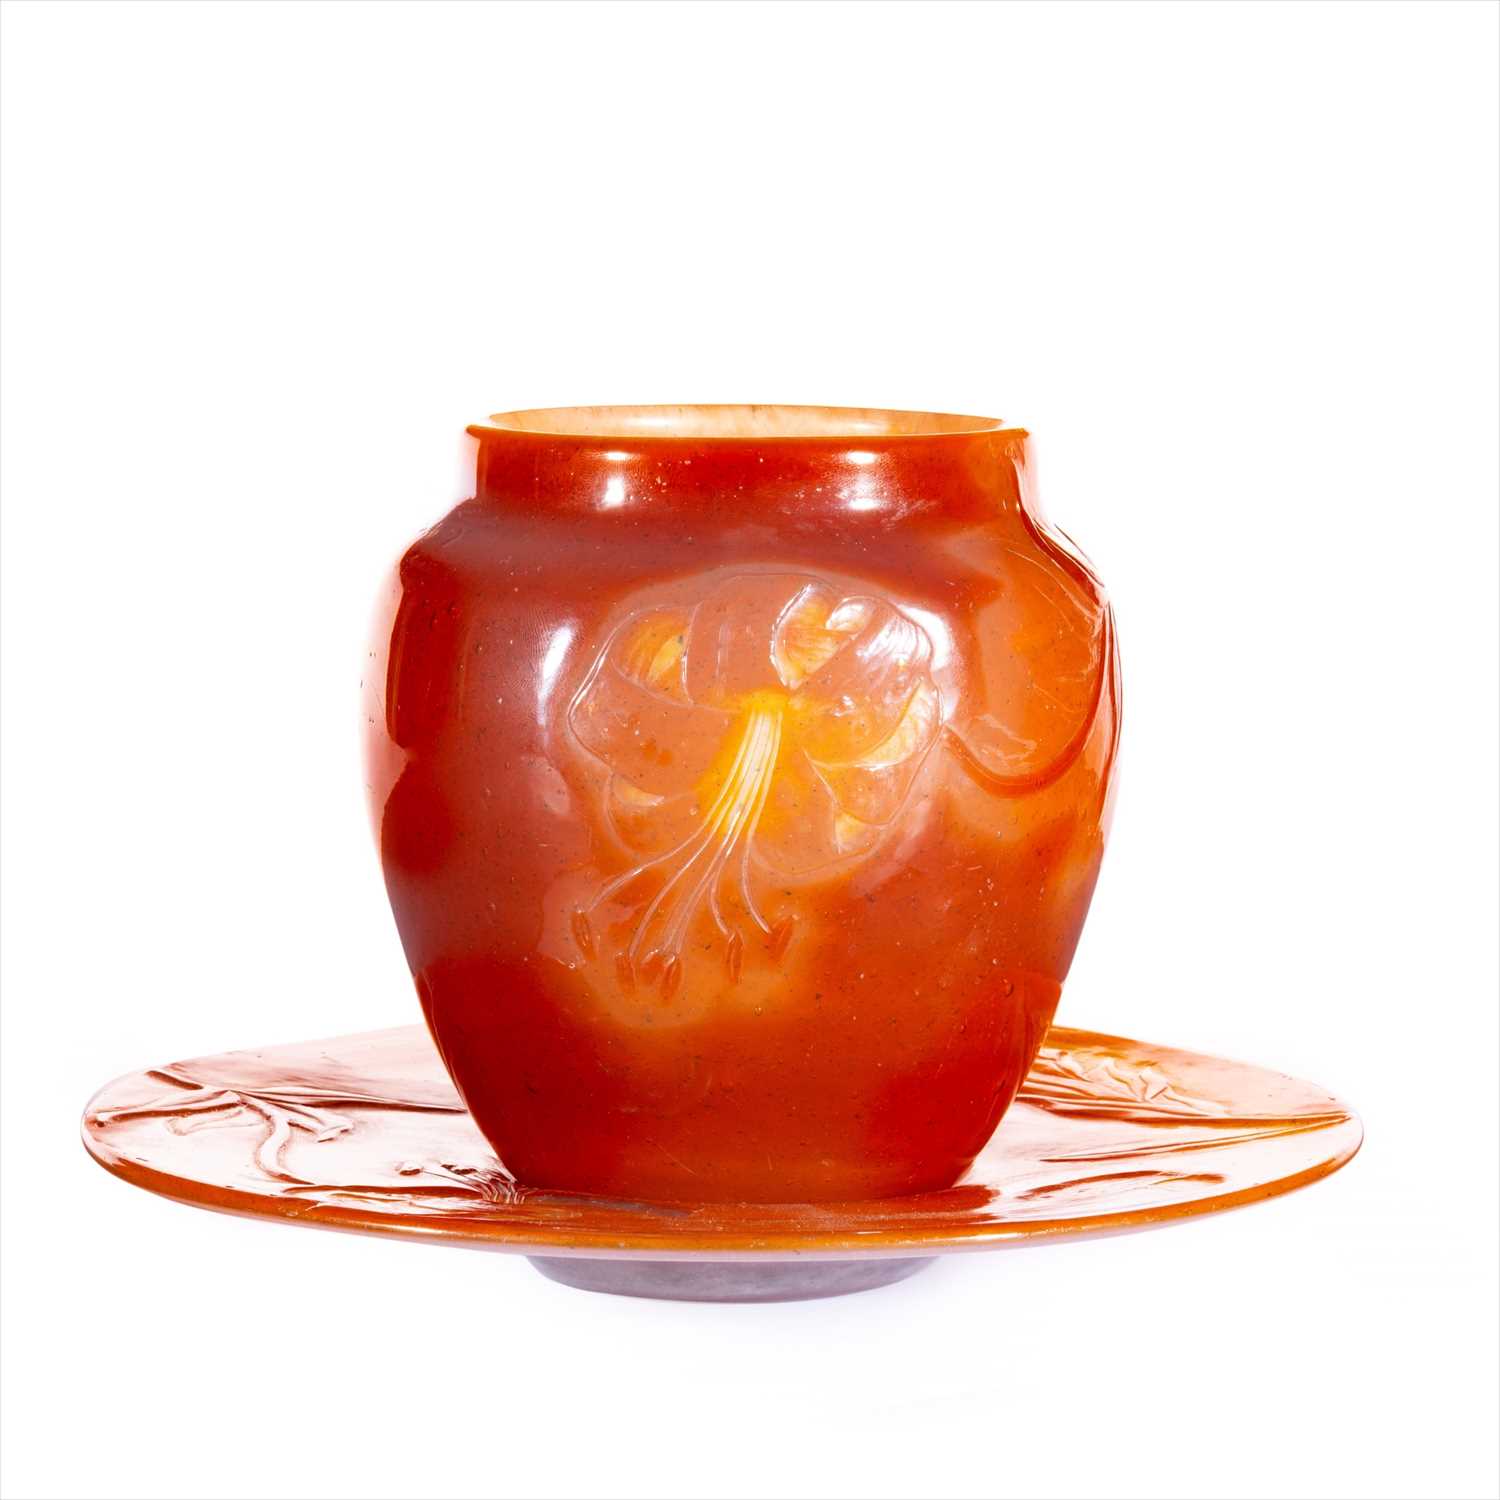 Lot 109 - A wheel carved and fire-polished cameo glass vase and stand, by Emile Gallé.